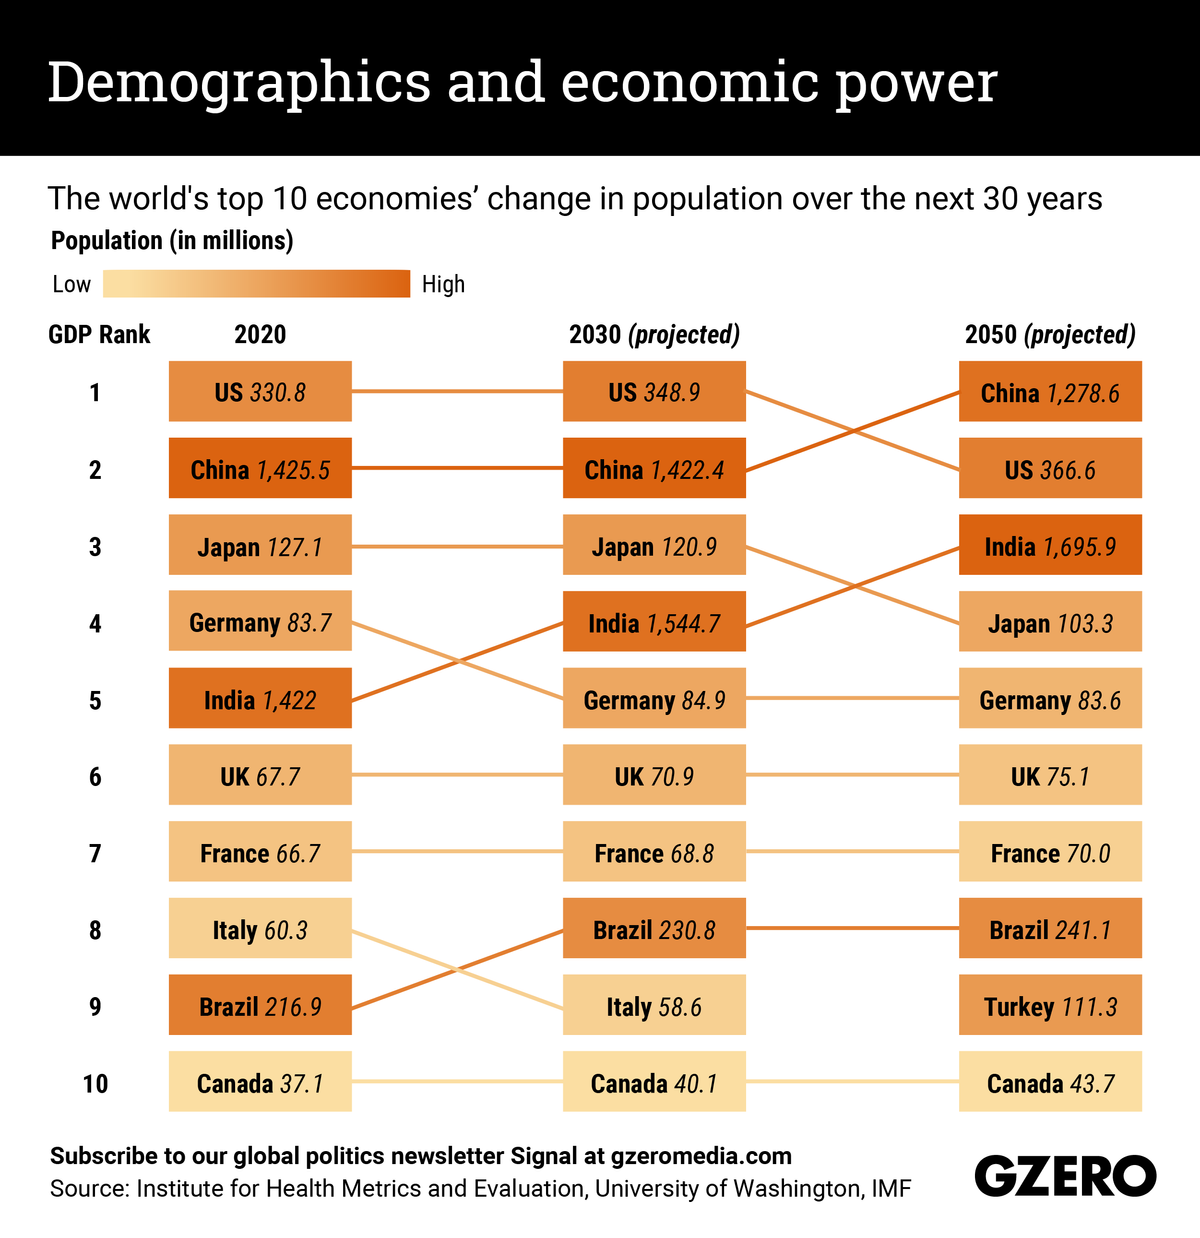 The Graphic Truth: Demographics and economic power